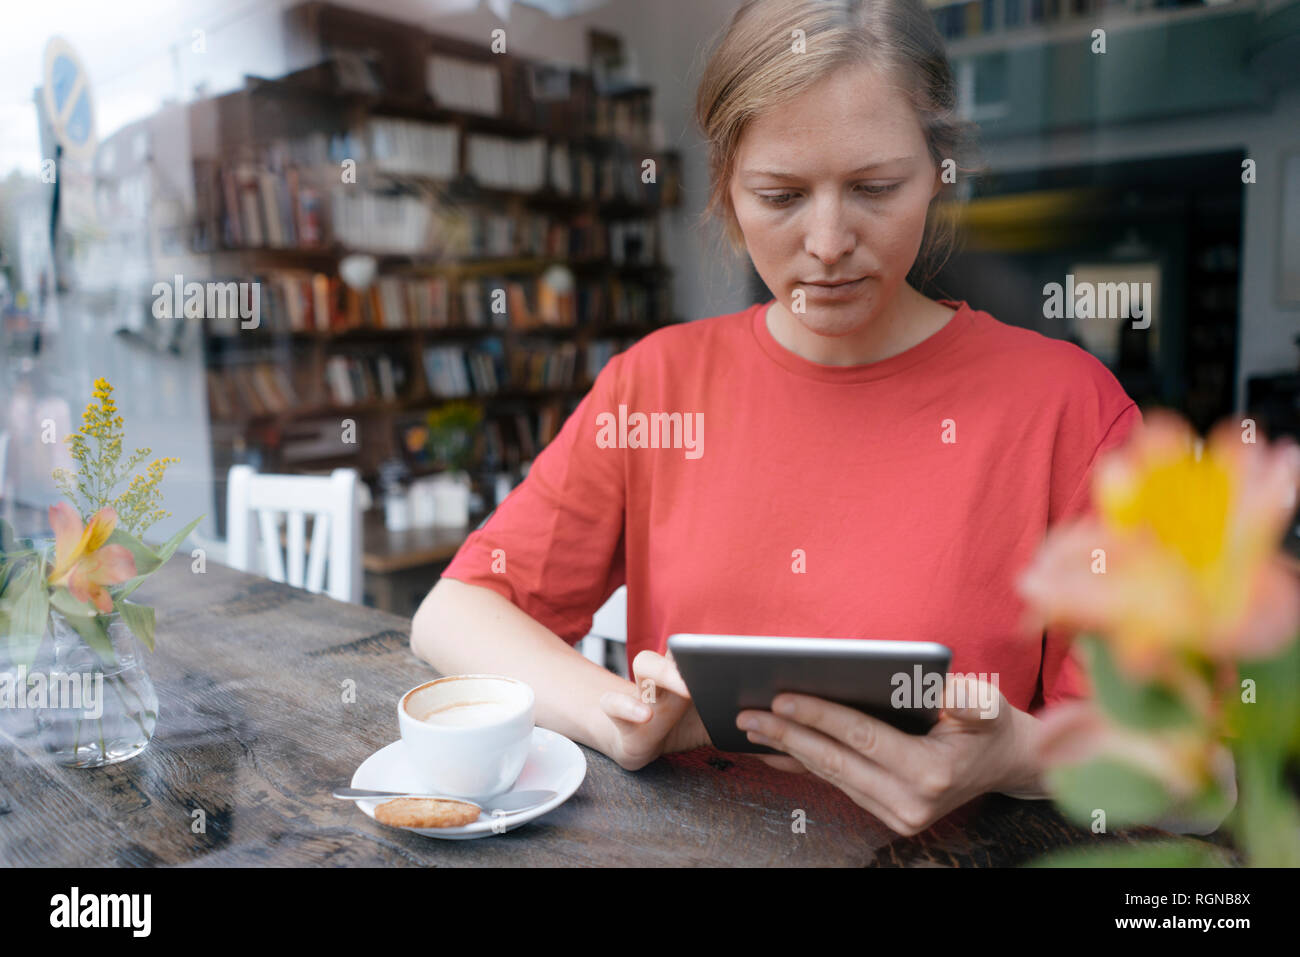 Young woman using tablet at the window in a cafe Stock Photo